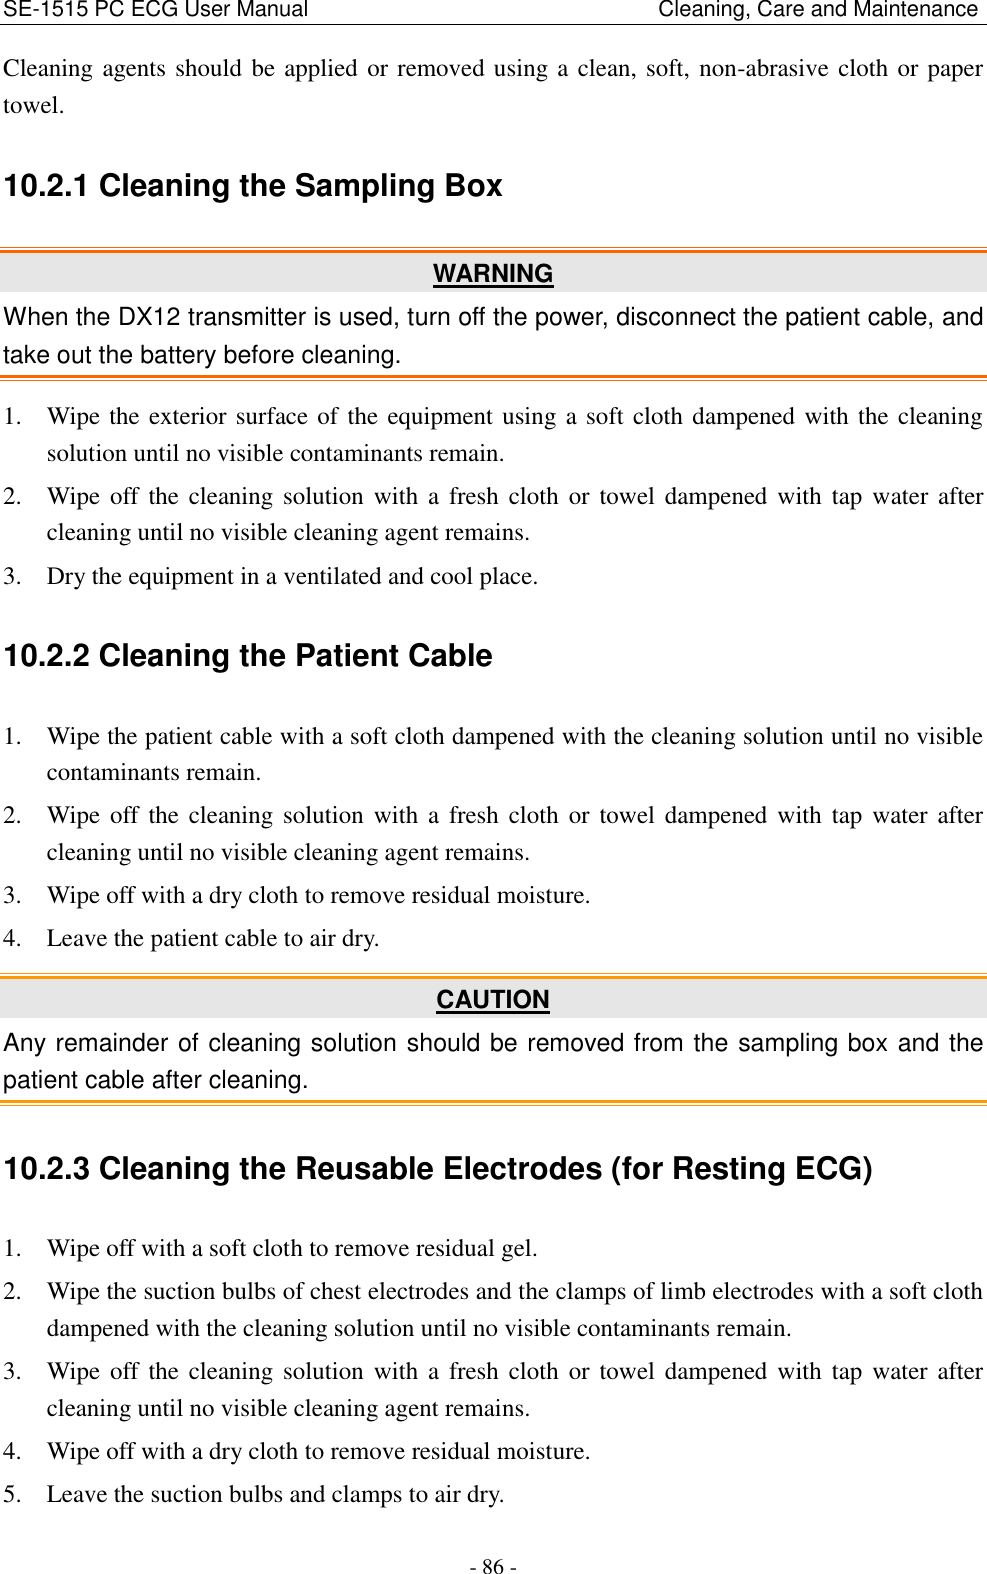 SE-1515 PC ECG User Manual                                                                Cleaning, Care and Maintenance - 86 - Cleaning agents should be applied or removed using a clean, soft, non-abrasive cloth or paper towel. 10.2.1 Cleaning the Sampling Box WARNING When the DX12 transmitter is used, turn off the power, disconnect the patient cable, and take out the battery before cleaning. 1. Wipe the exterior surface of the equipment using a soft cloth dampened with the cleaning solution until no visible contaminants remain. 2. Wipe off the  cleaning solution  with  a  fresh cloth  or  towel  dampened with  tap  water after cleaning until no visible cleaning agent remains. 3. Dry the equipment in a ventilated and cool place. 10.2.2 Cleaning the Patient Cable 1. Wipe the patient cable with a soft cloth dampened with the cleaning solution until no visible contaminants remain. 2. Wipe off the  cleaning solution  with  a  fresh cloth  or  towel  dampened with  tap  water after cleaning until no visible cleaning agent remains. 3. Wipe off with a dry cloth to remove residual moisture. 4. Leave the patient cable to air dry. CAUTION Any remainder of cleaning solution should be removed from the sampling box and the patient cable after cleaning. 10.2.3 Cleaning the Reusable Electrodes (for Resting ECG) 1. Wipe off with a soft cloth to remove residual gel. 2. Wipe the suction bulbs of chest electrodes and the clamps of limb electrodes with a soft cloth dampened with the cleaning solution until no visible contaminants remain. 3. Wipe off the  cleaning solution  with  a  fresh cloth  or  towel  dampened with  tap  water after cleaning until no visible cleaning agent remains. 4. Wipe off with a dry cloth to remove residual moisture. 5. Leave the suction bulbs and clamps to air dry. 